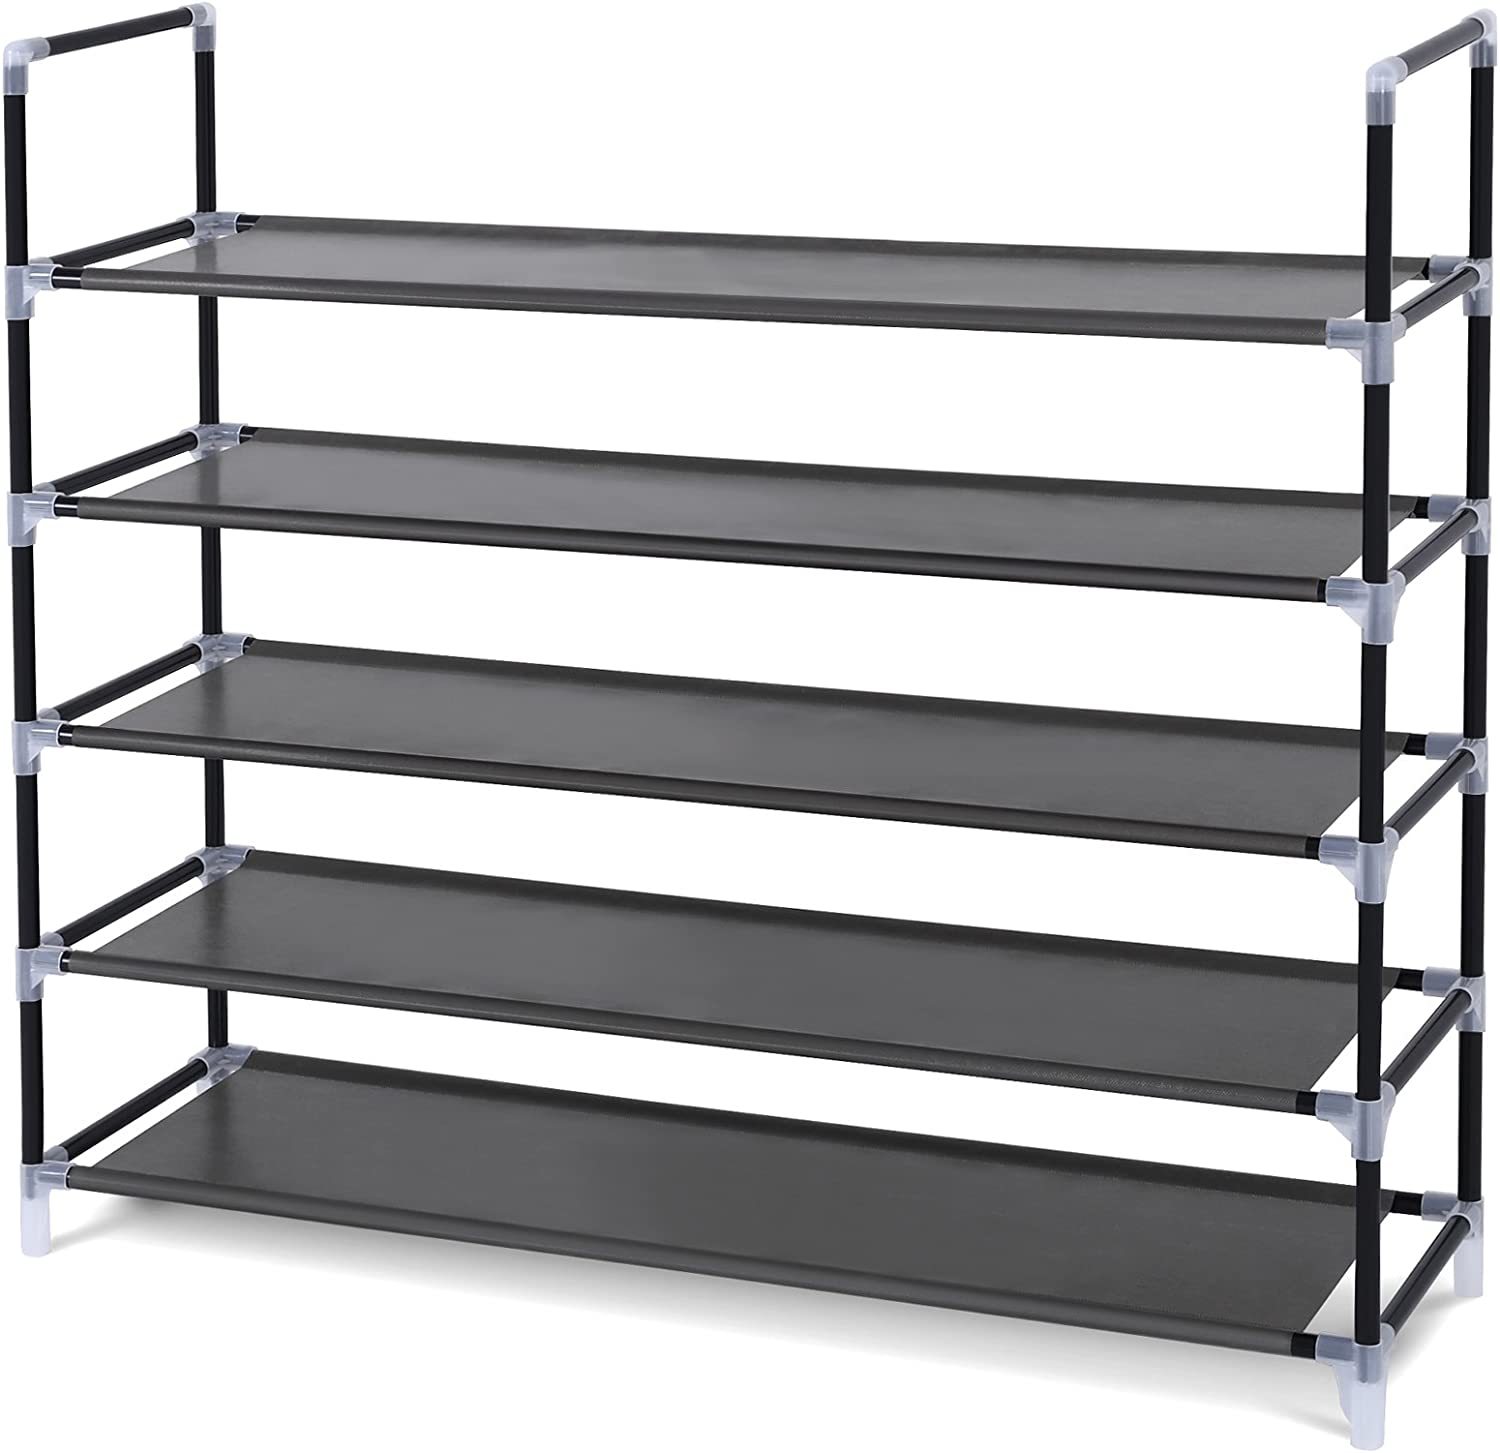 9 Tiers Metal Shoe Rack Organizer, 50-55 Pairs Large Tall Shoe Storage,Shoe  Holder,Shoe Stand,Vertical Free Standing Shoe Shelf,Heavy Duty Boot Rack  for Entryway, Closet, Garage, Bedroom